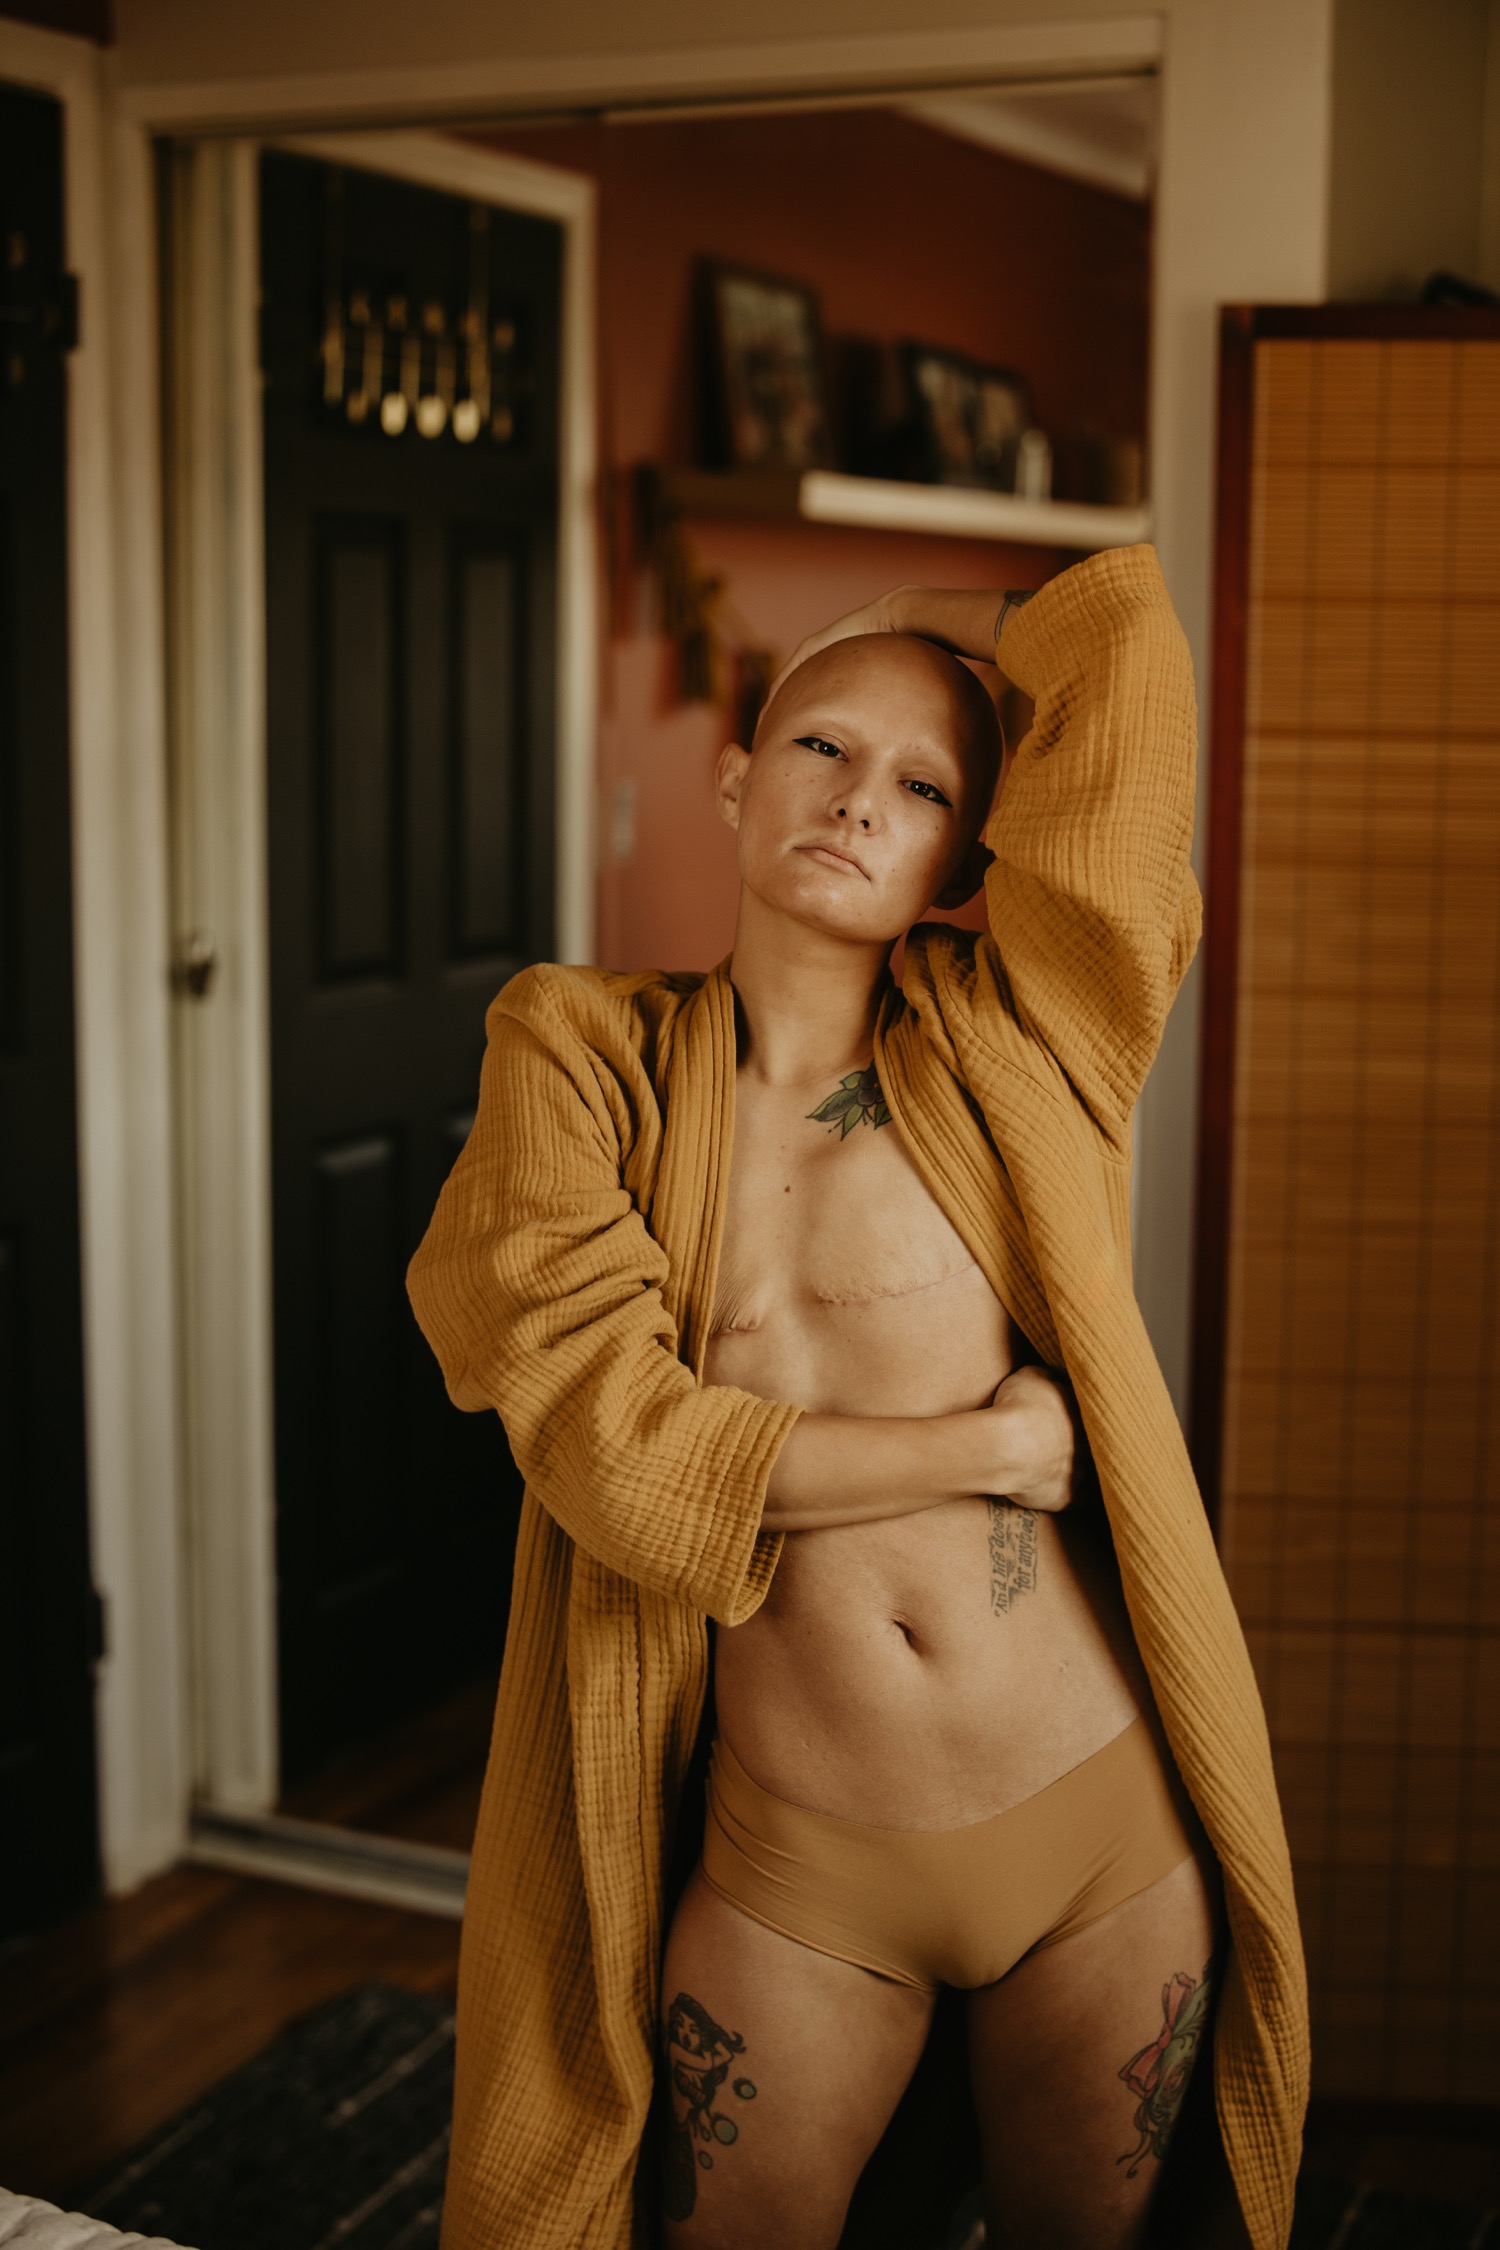 Topless and proud of it: Dartmouth woman embracing life after double  mastectomy